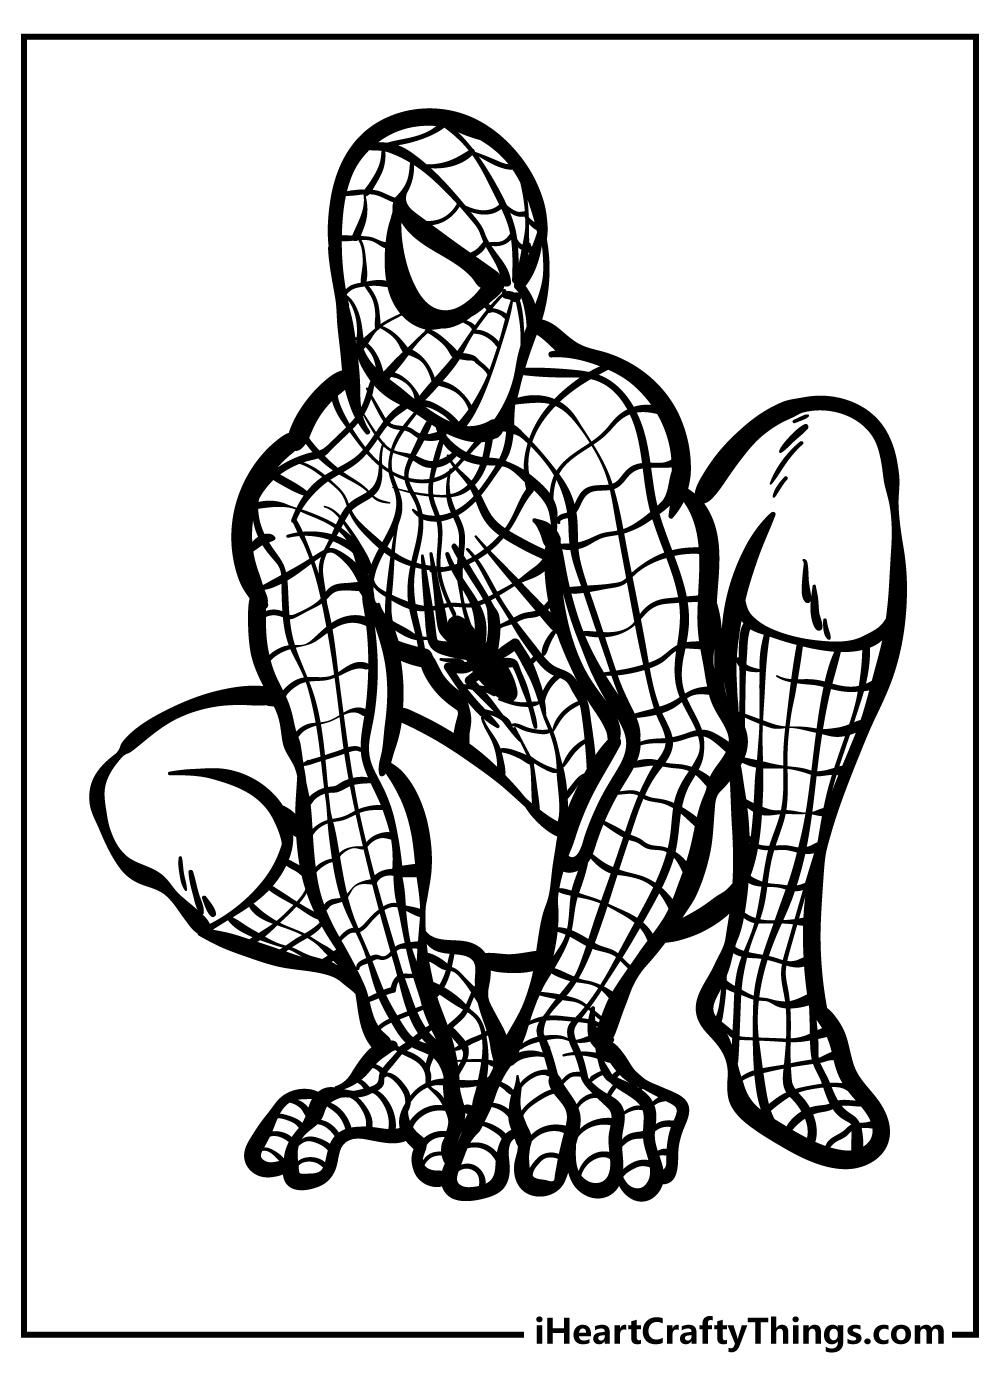 Spider-Man Coloring Pages for adults free printable